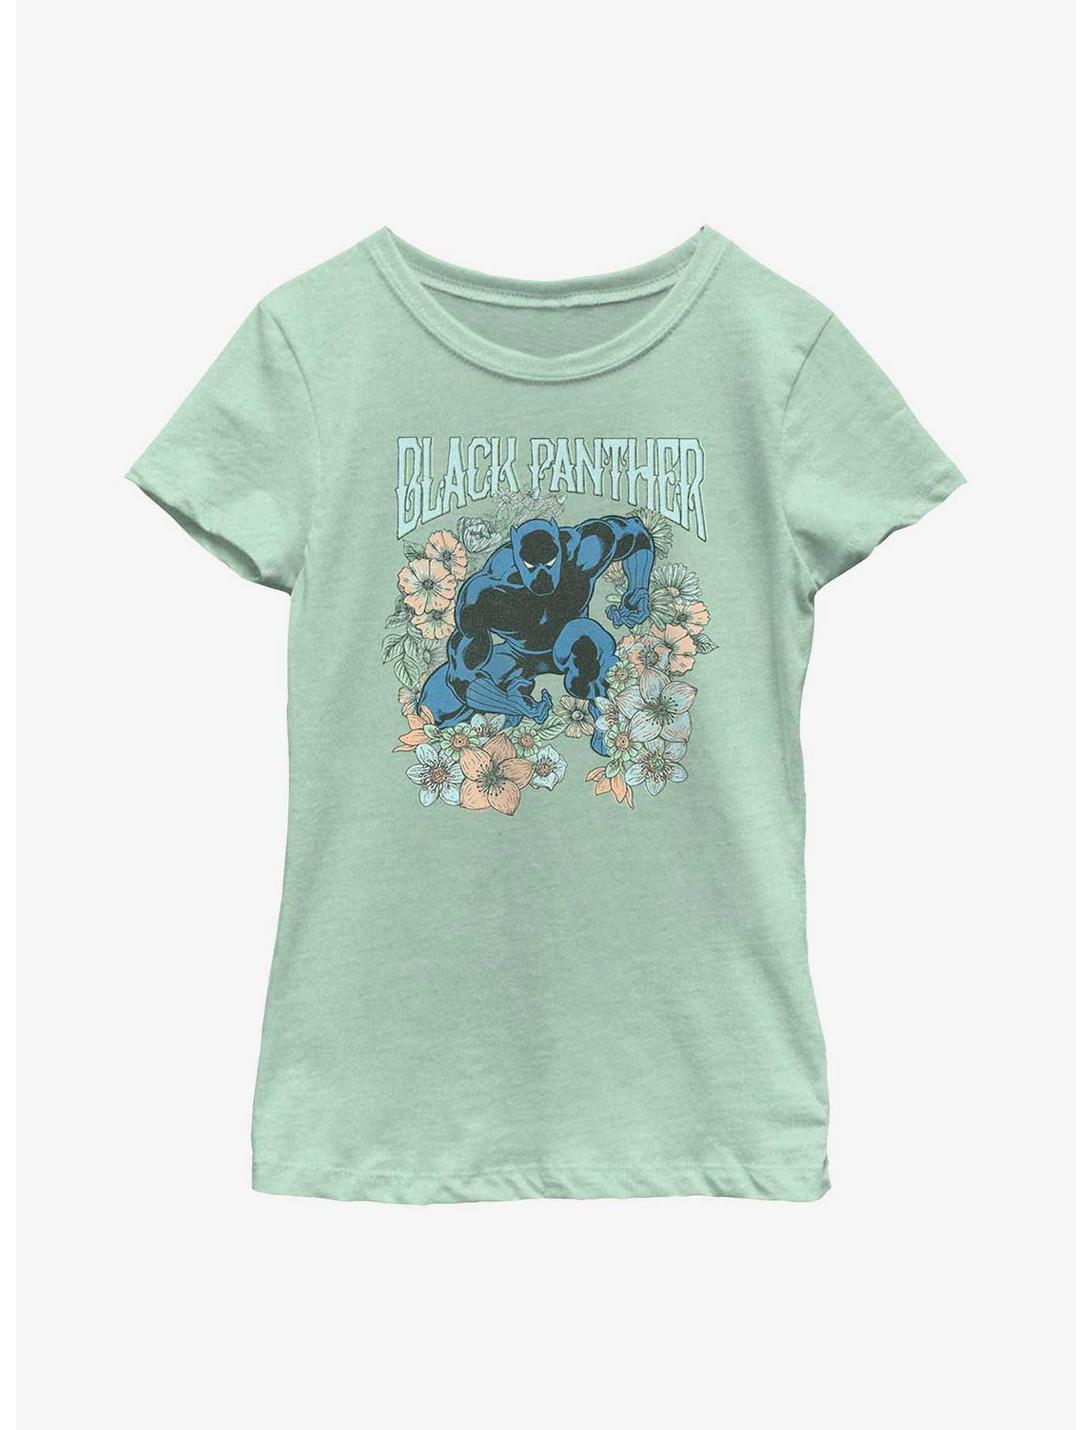 Marvel Black Panther Spring Pounce Youth Girls T-Shirt, MINT, hi-res